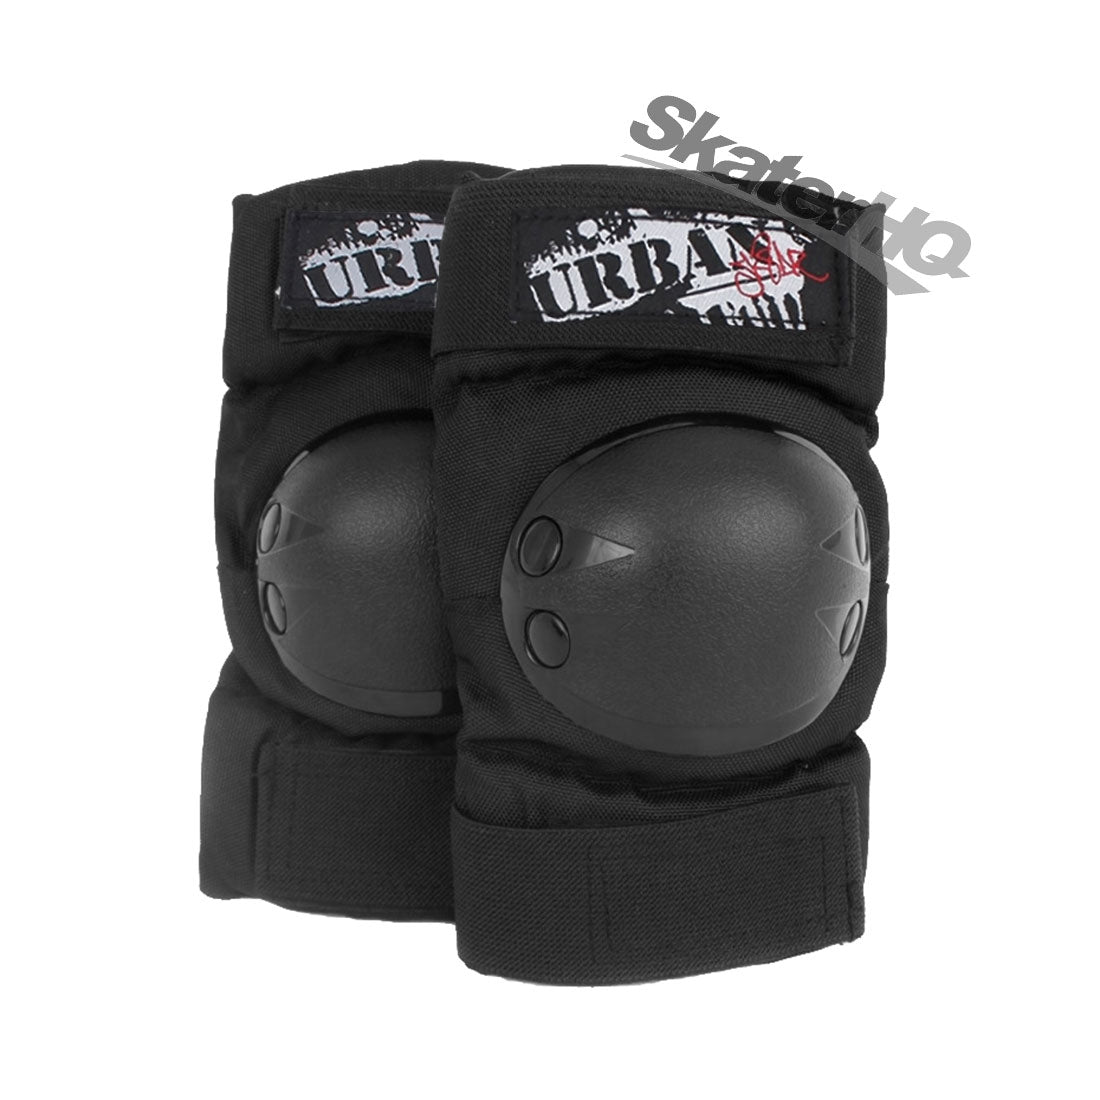 Urban Skater Elbow Pads - Small Protective Gear